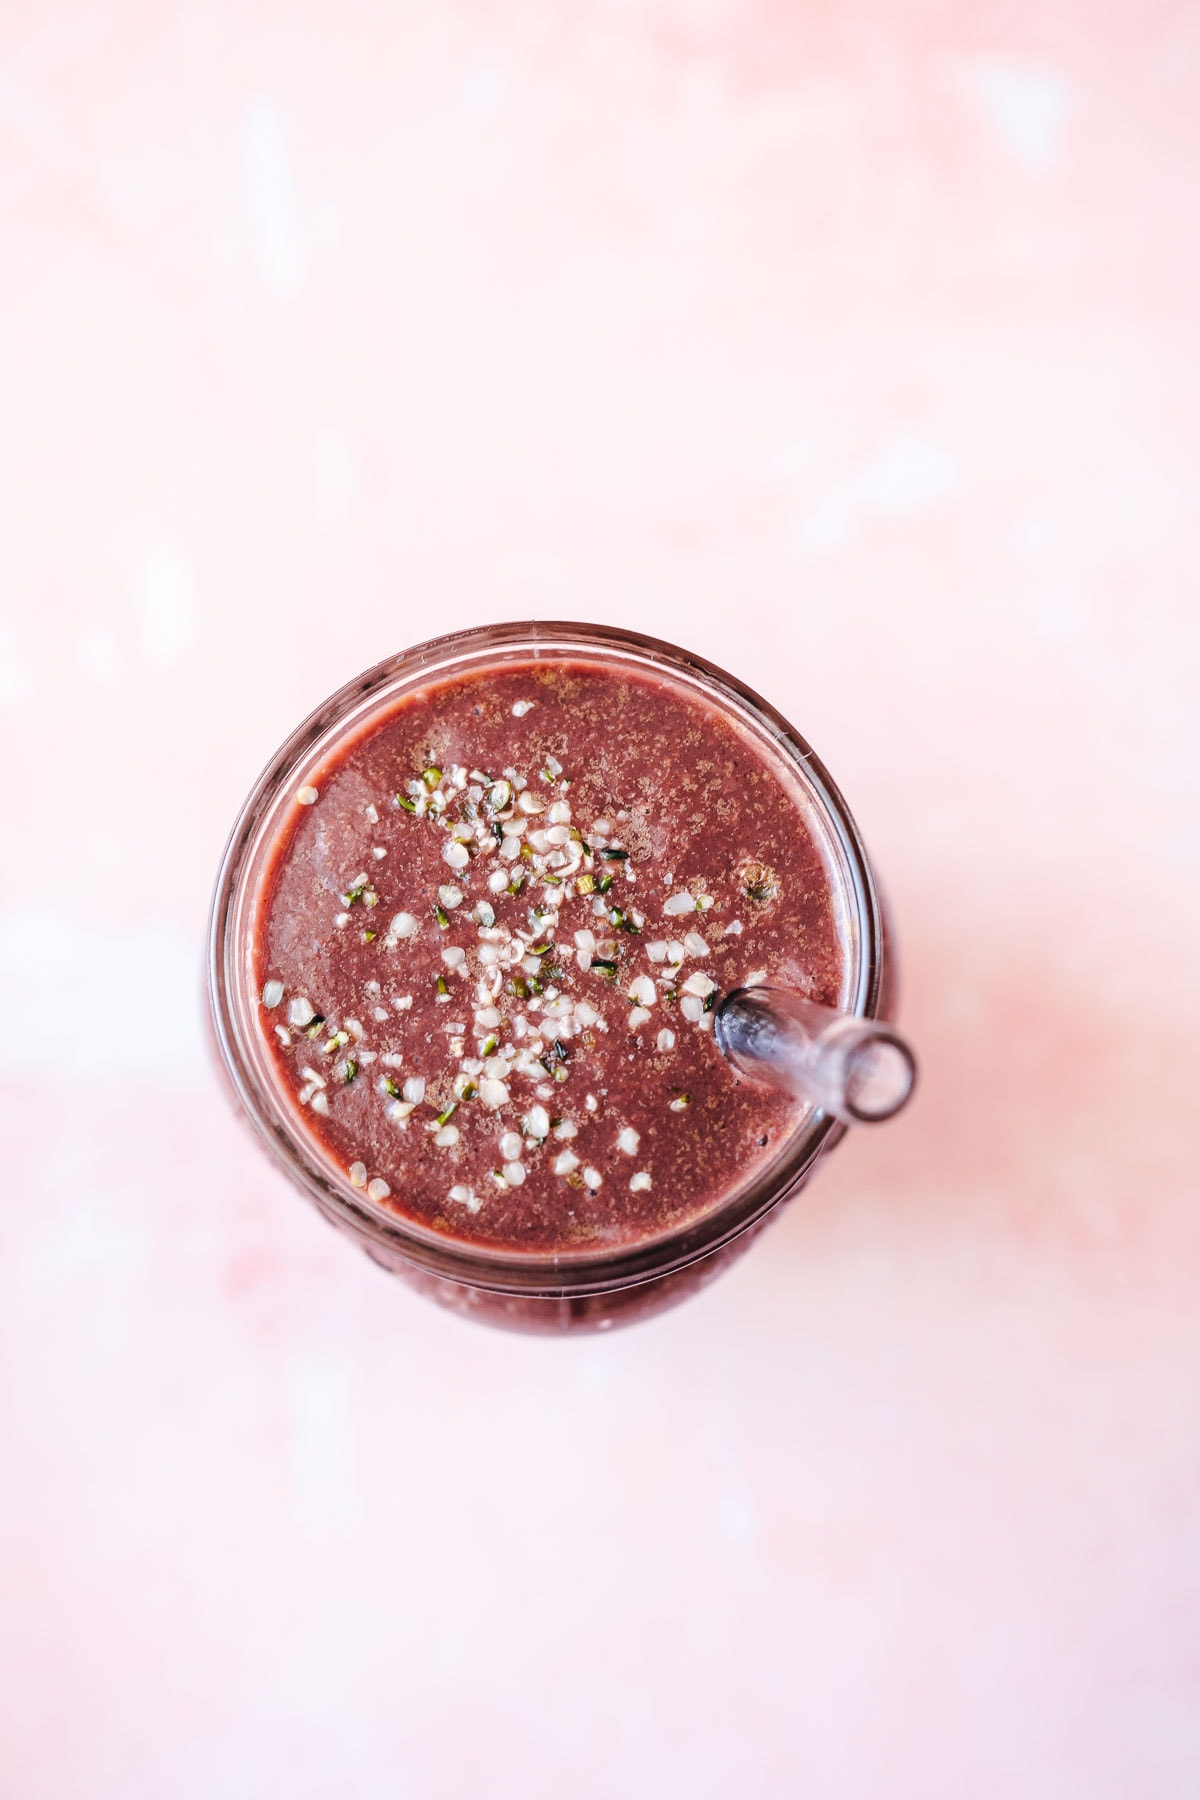 Top view of a smoothie sprinkled with hemp seeds.